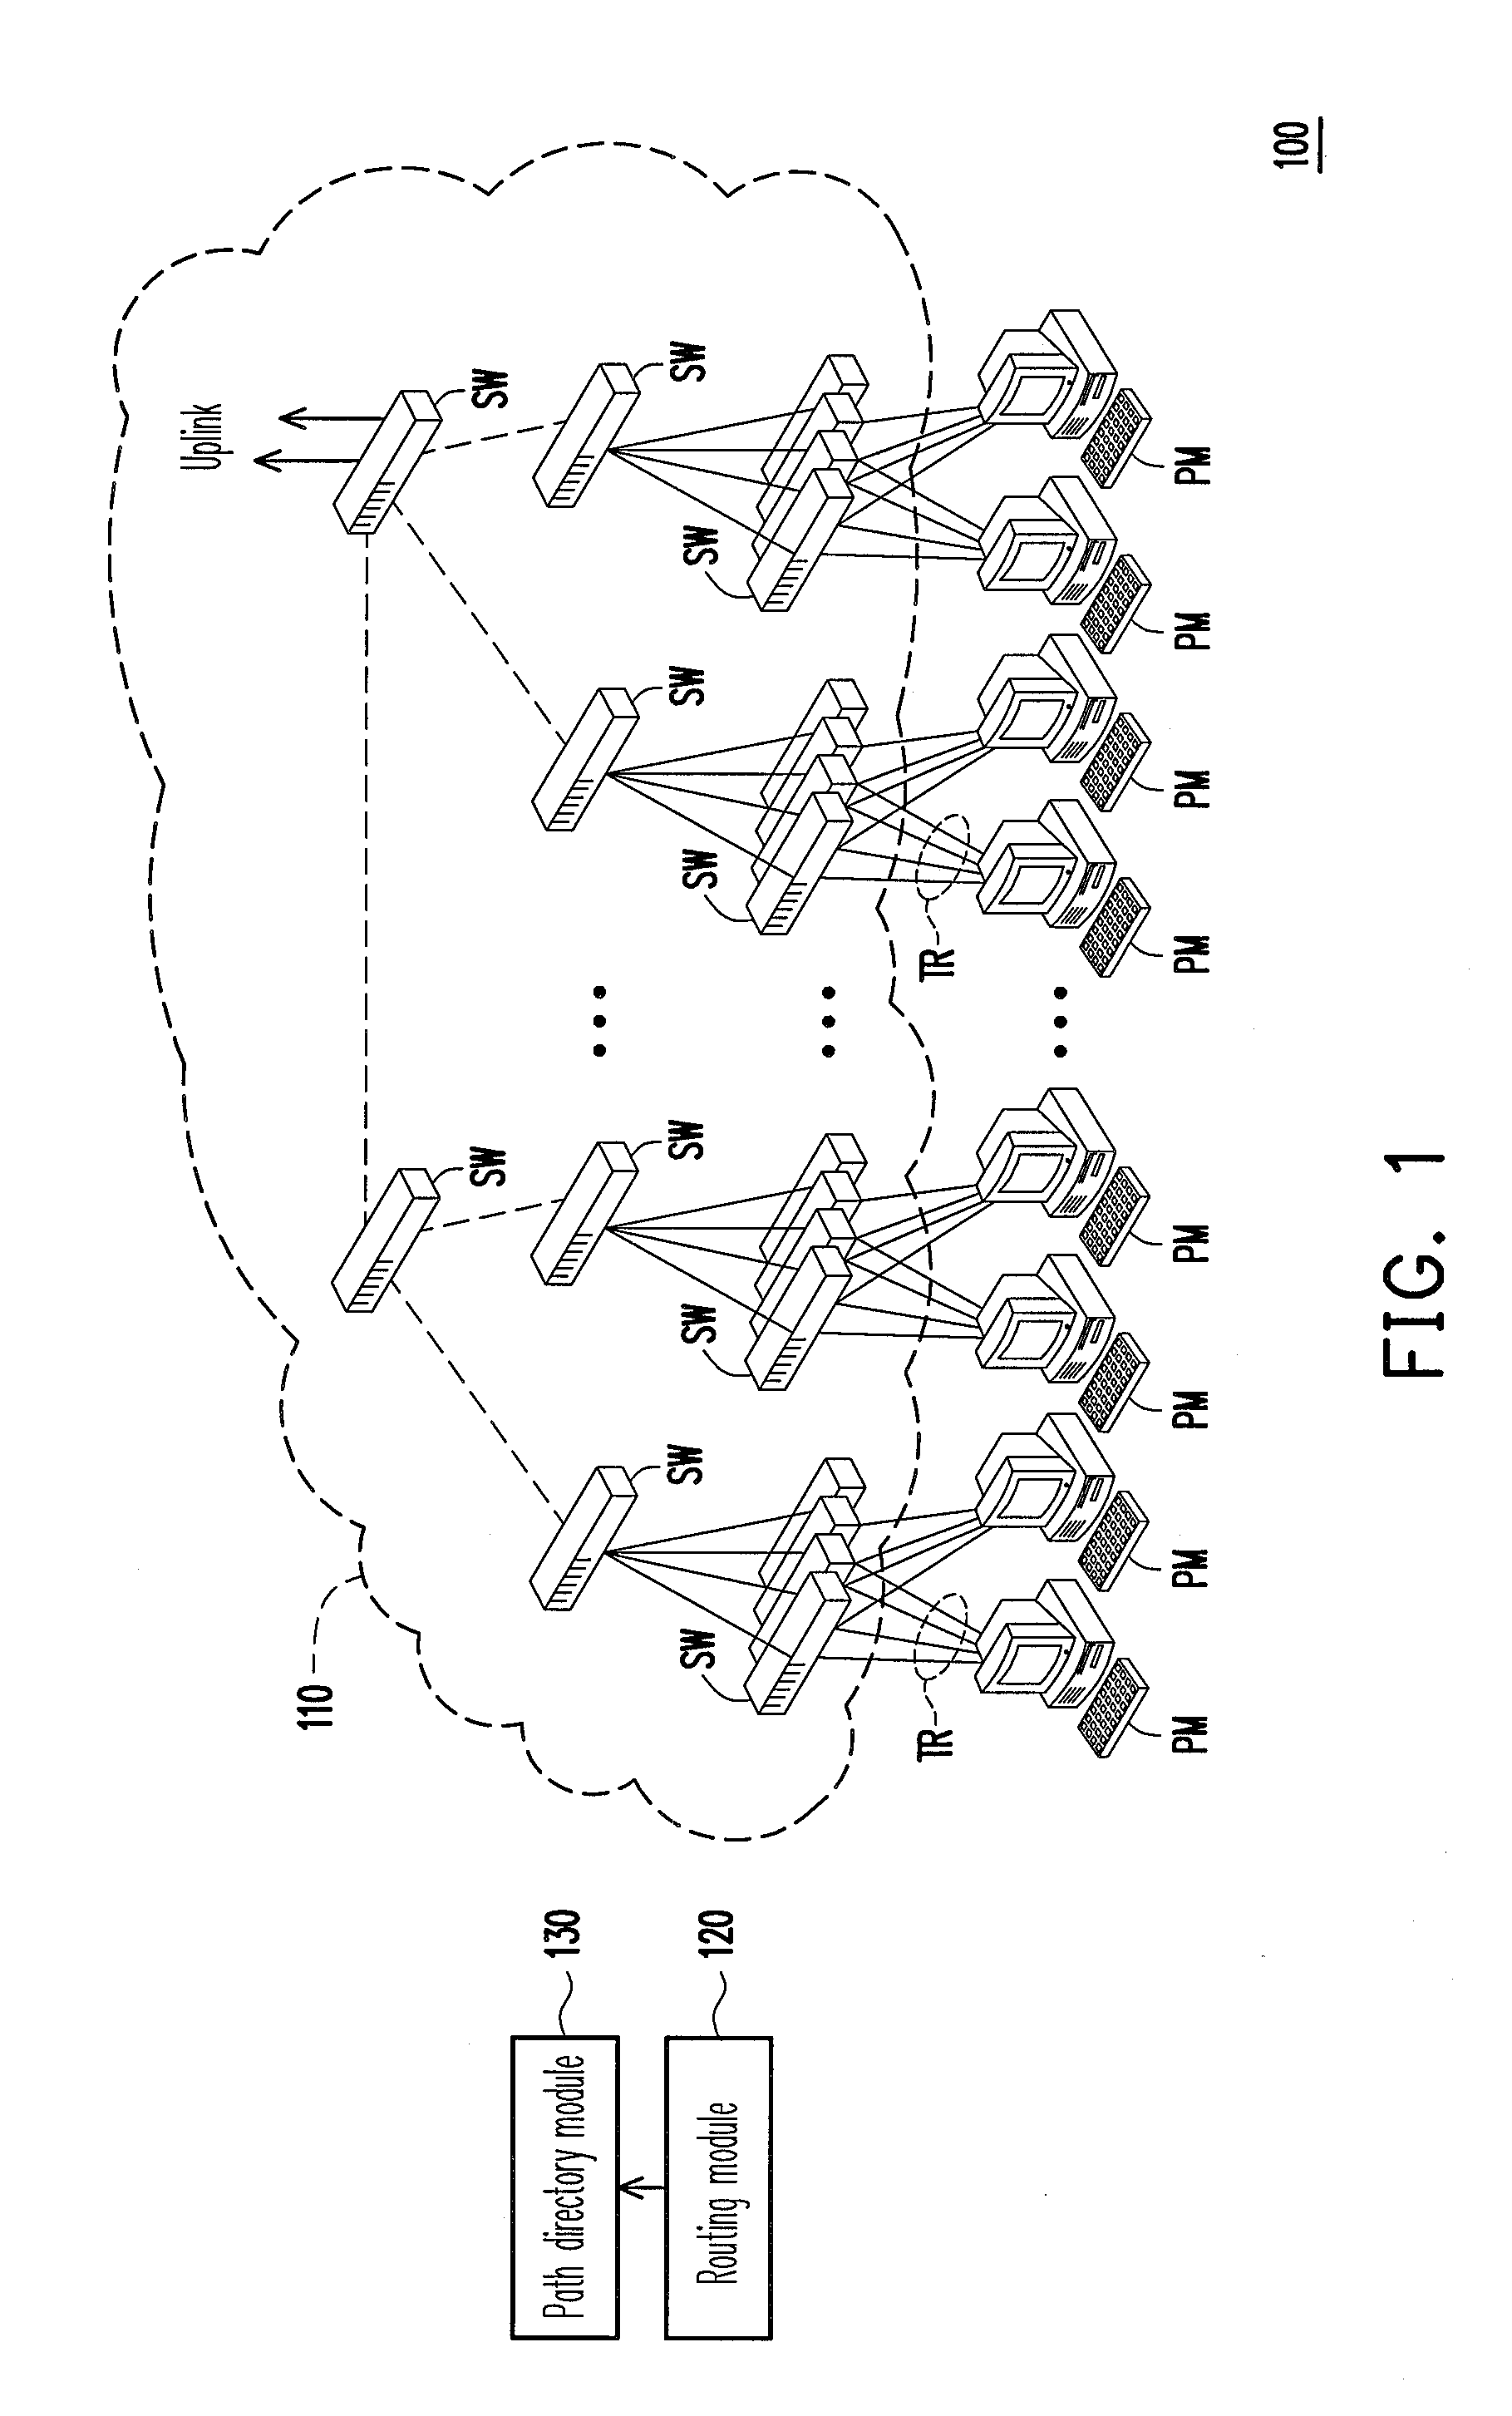 Network system and method of address resolution